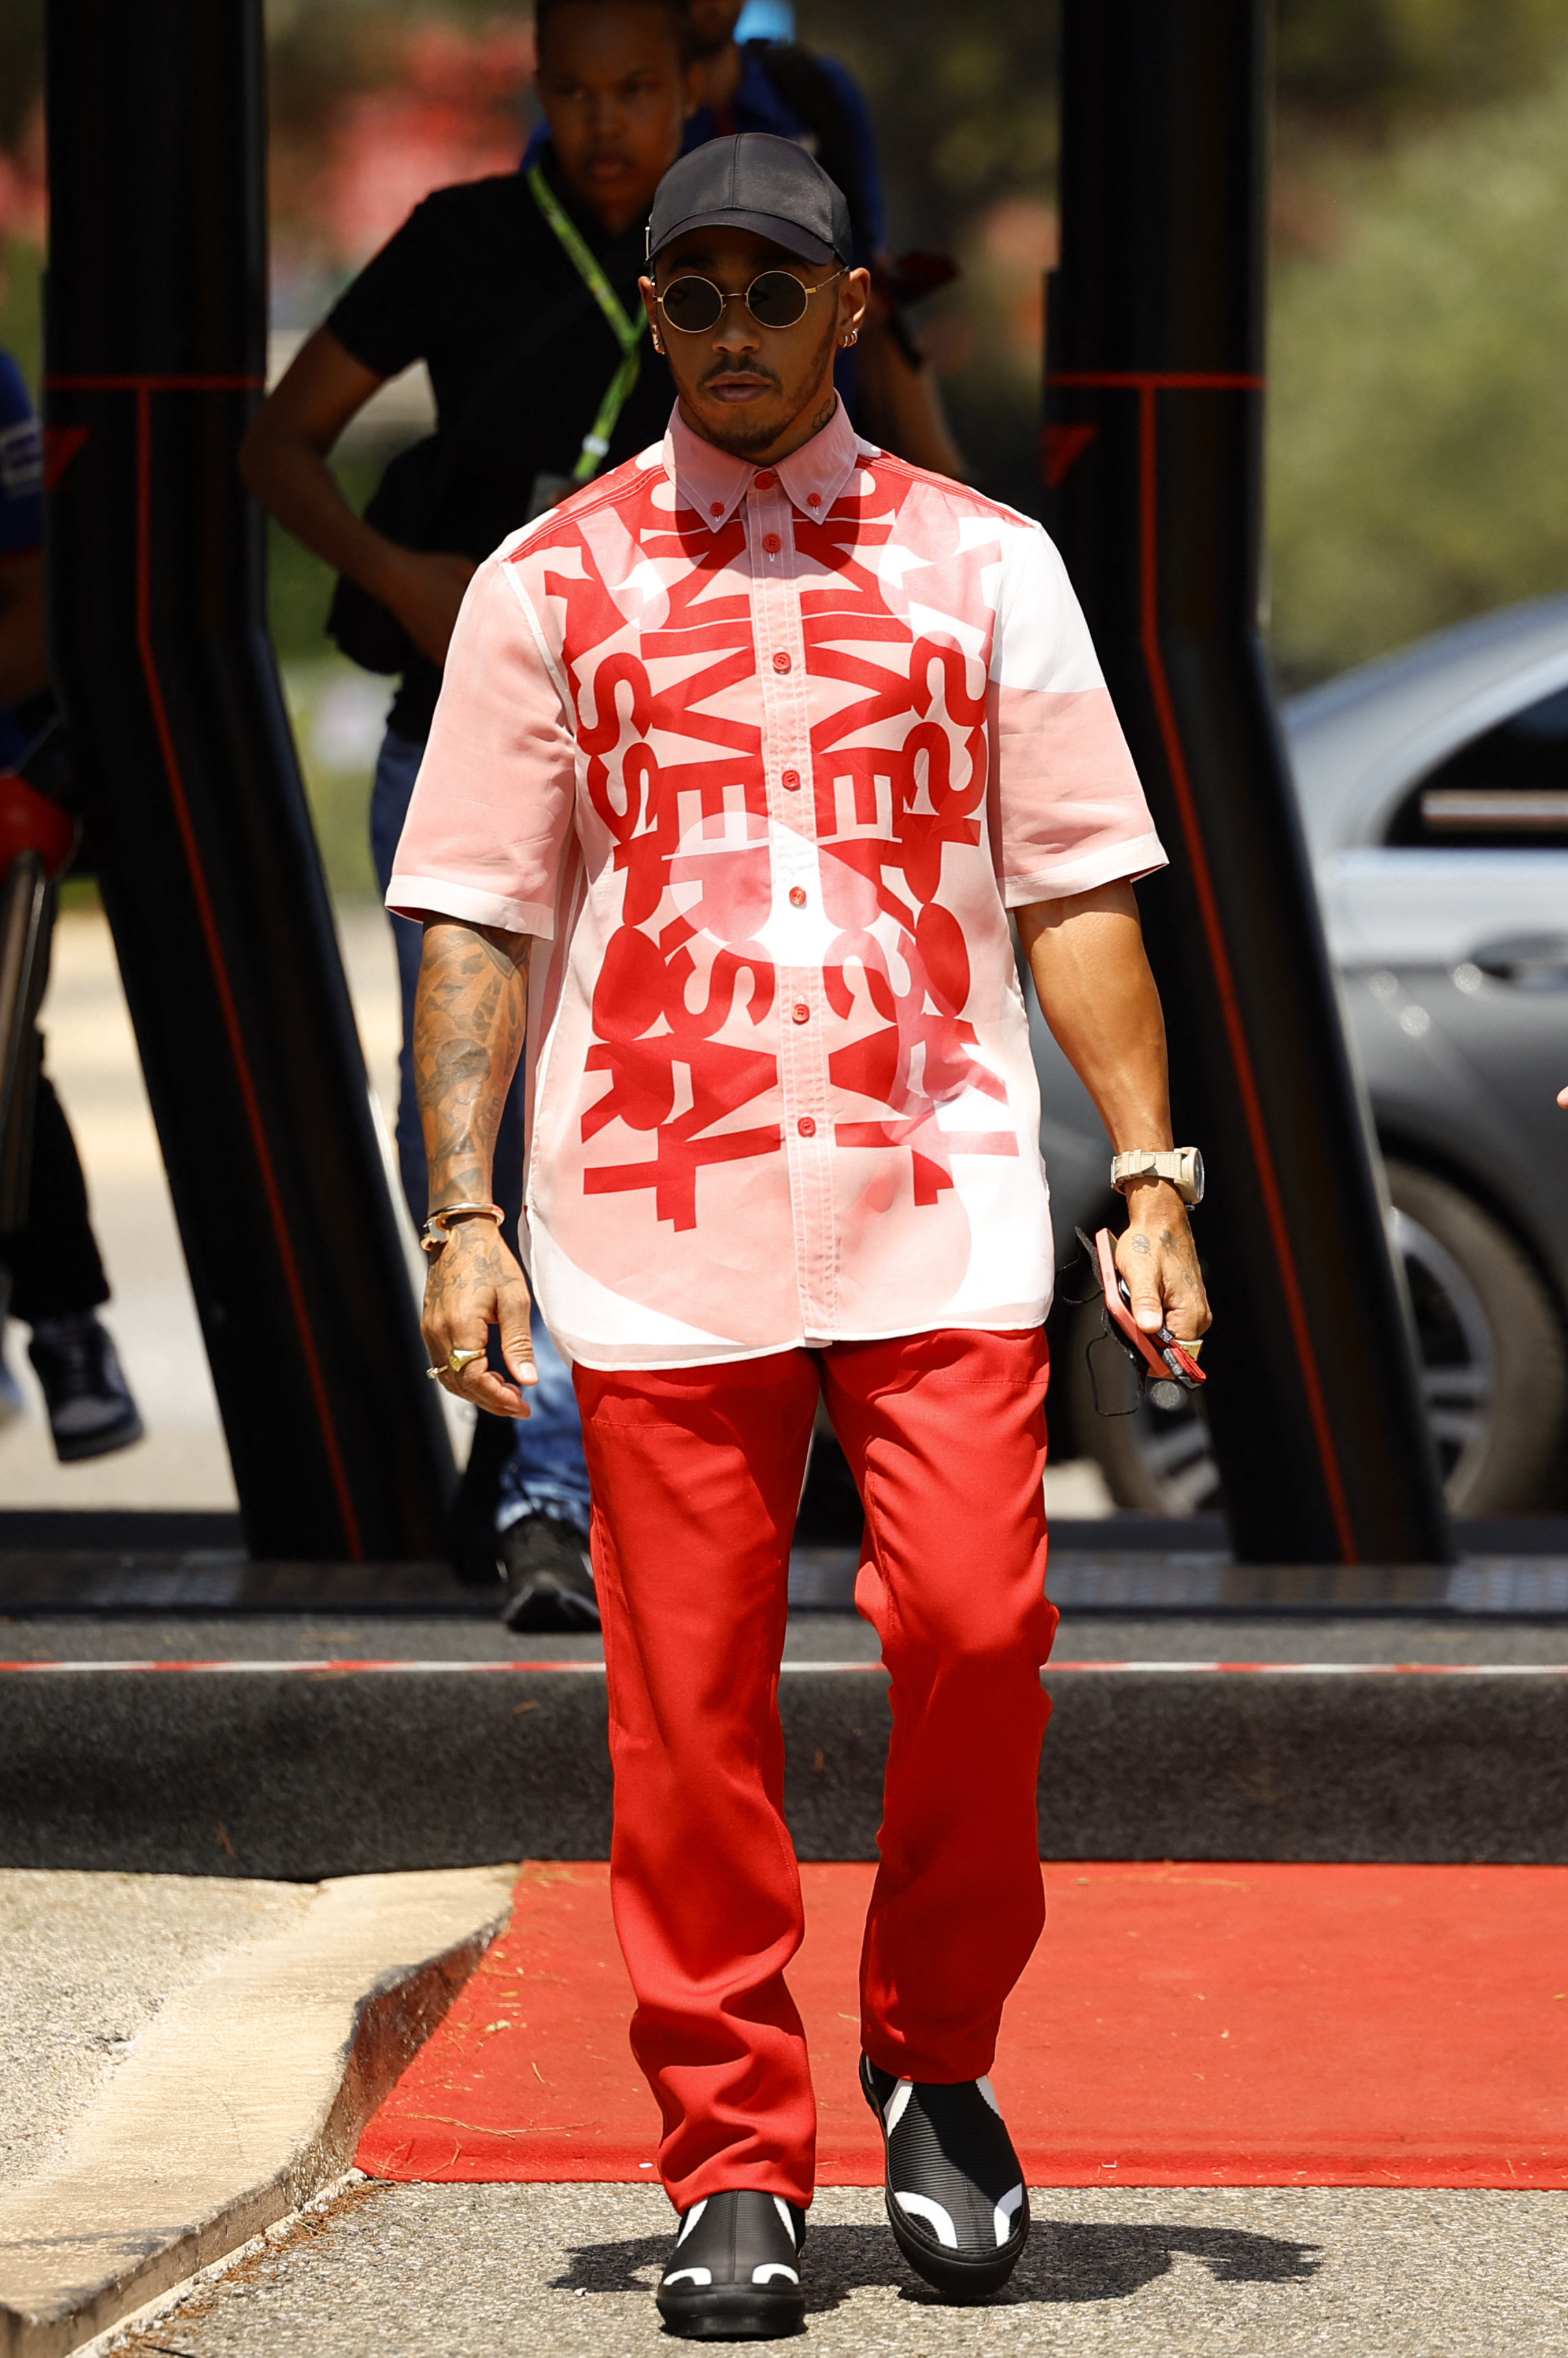 Lewis Hamilton flaunted his typically ostentatious style in the paddock ahead of this summer’s French Grand Prix. Photo: Reuters